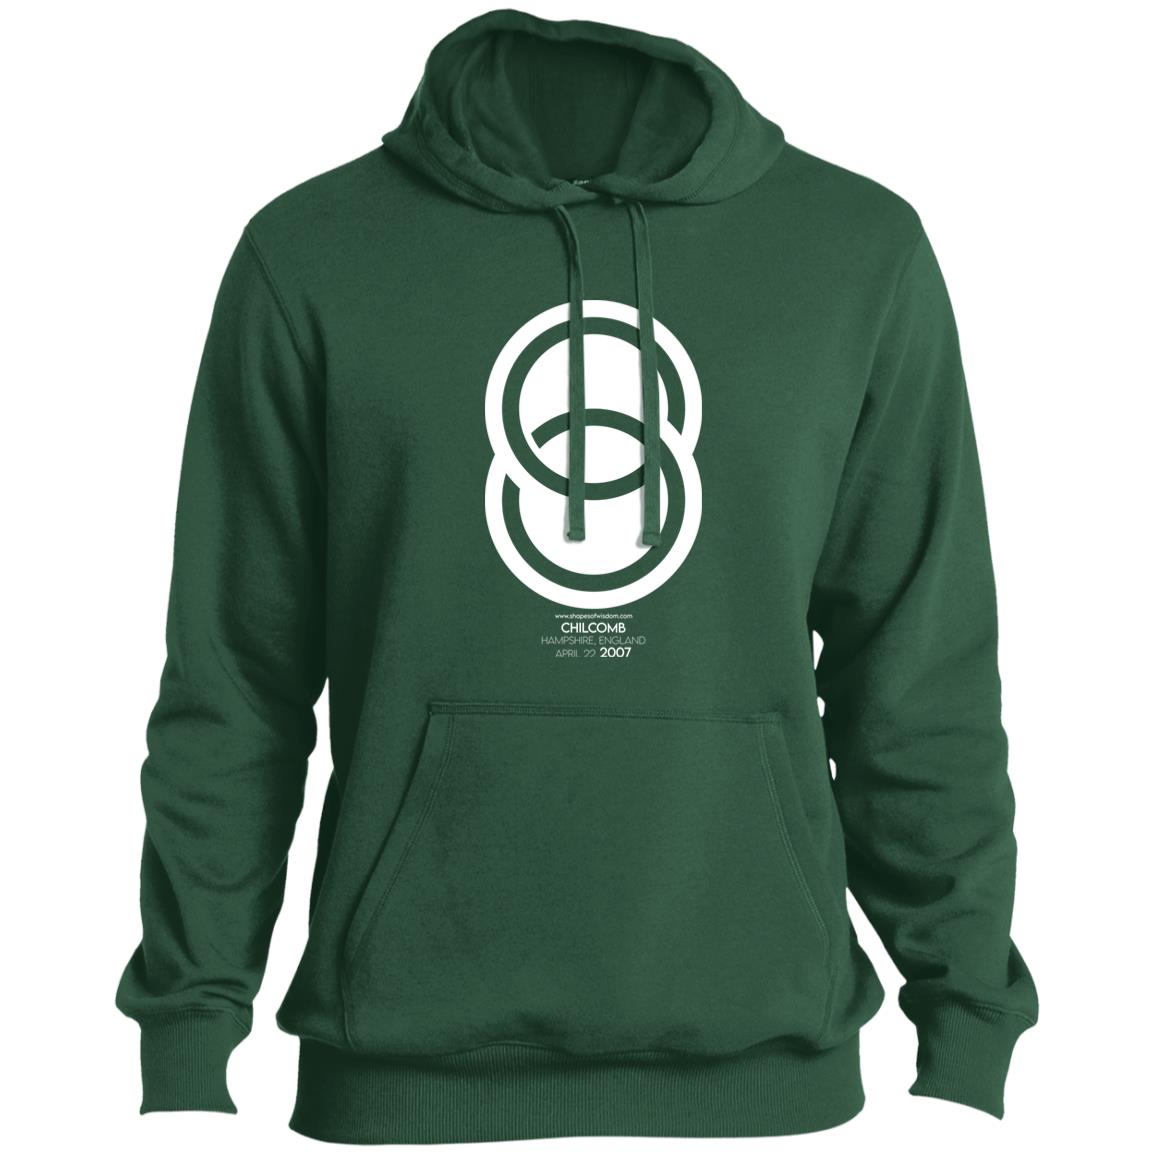 Crop Circle Pullover Hoodie - Chilcomb 3